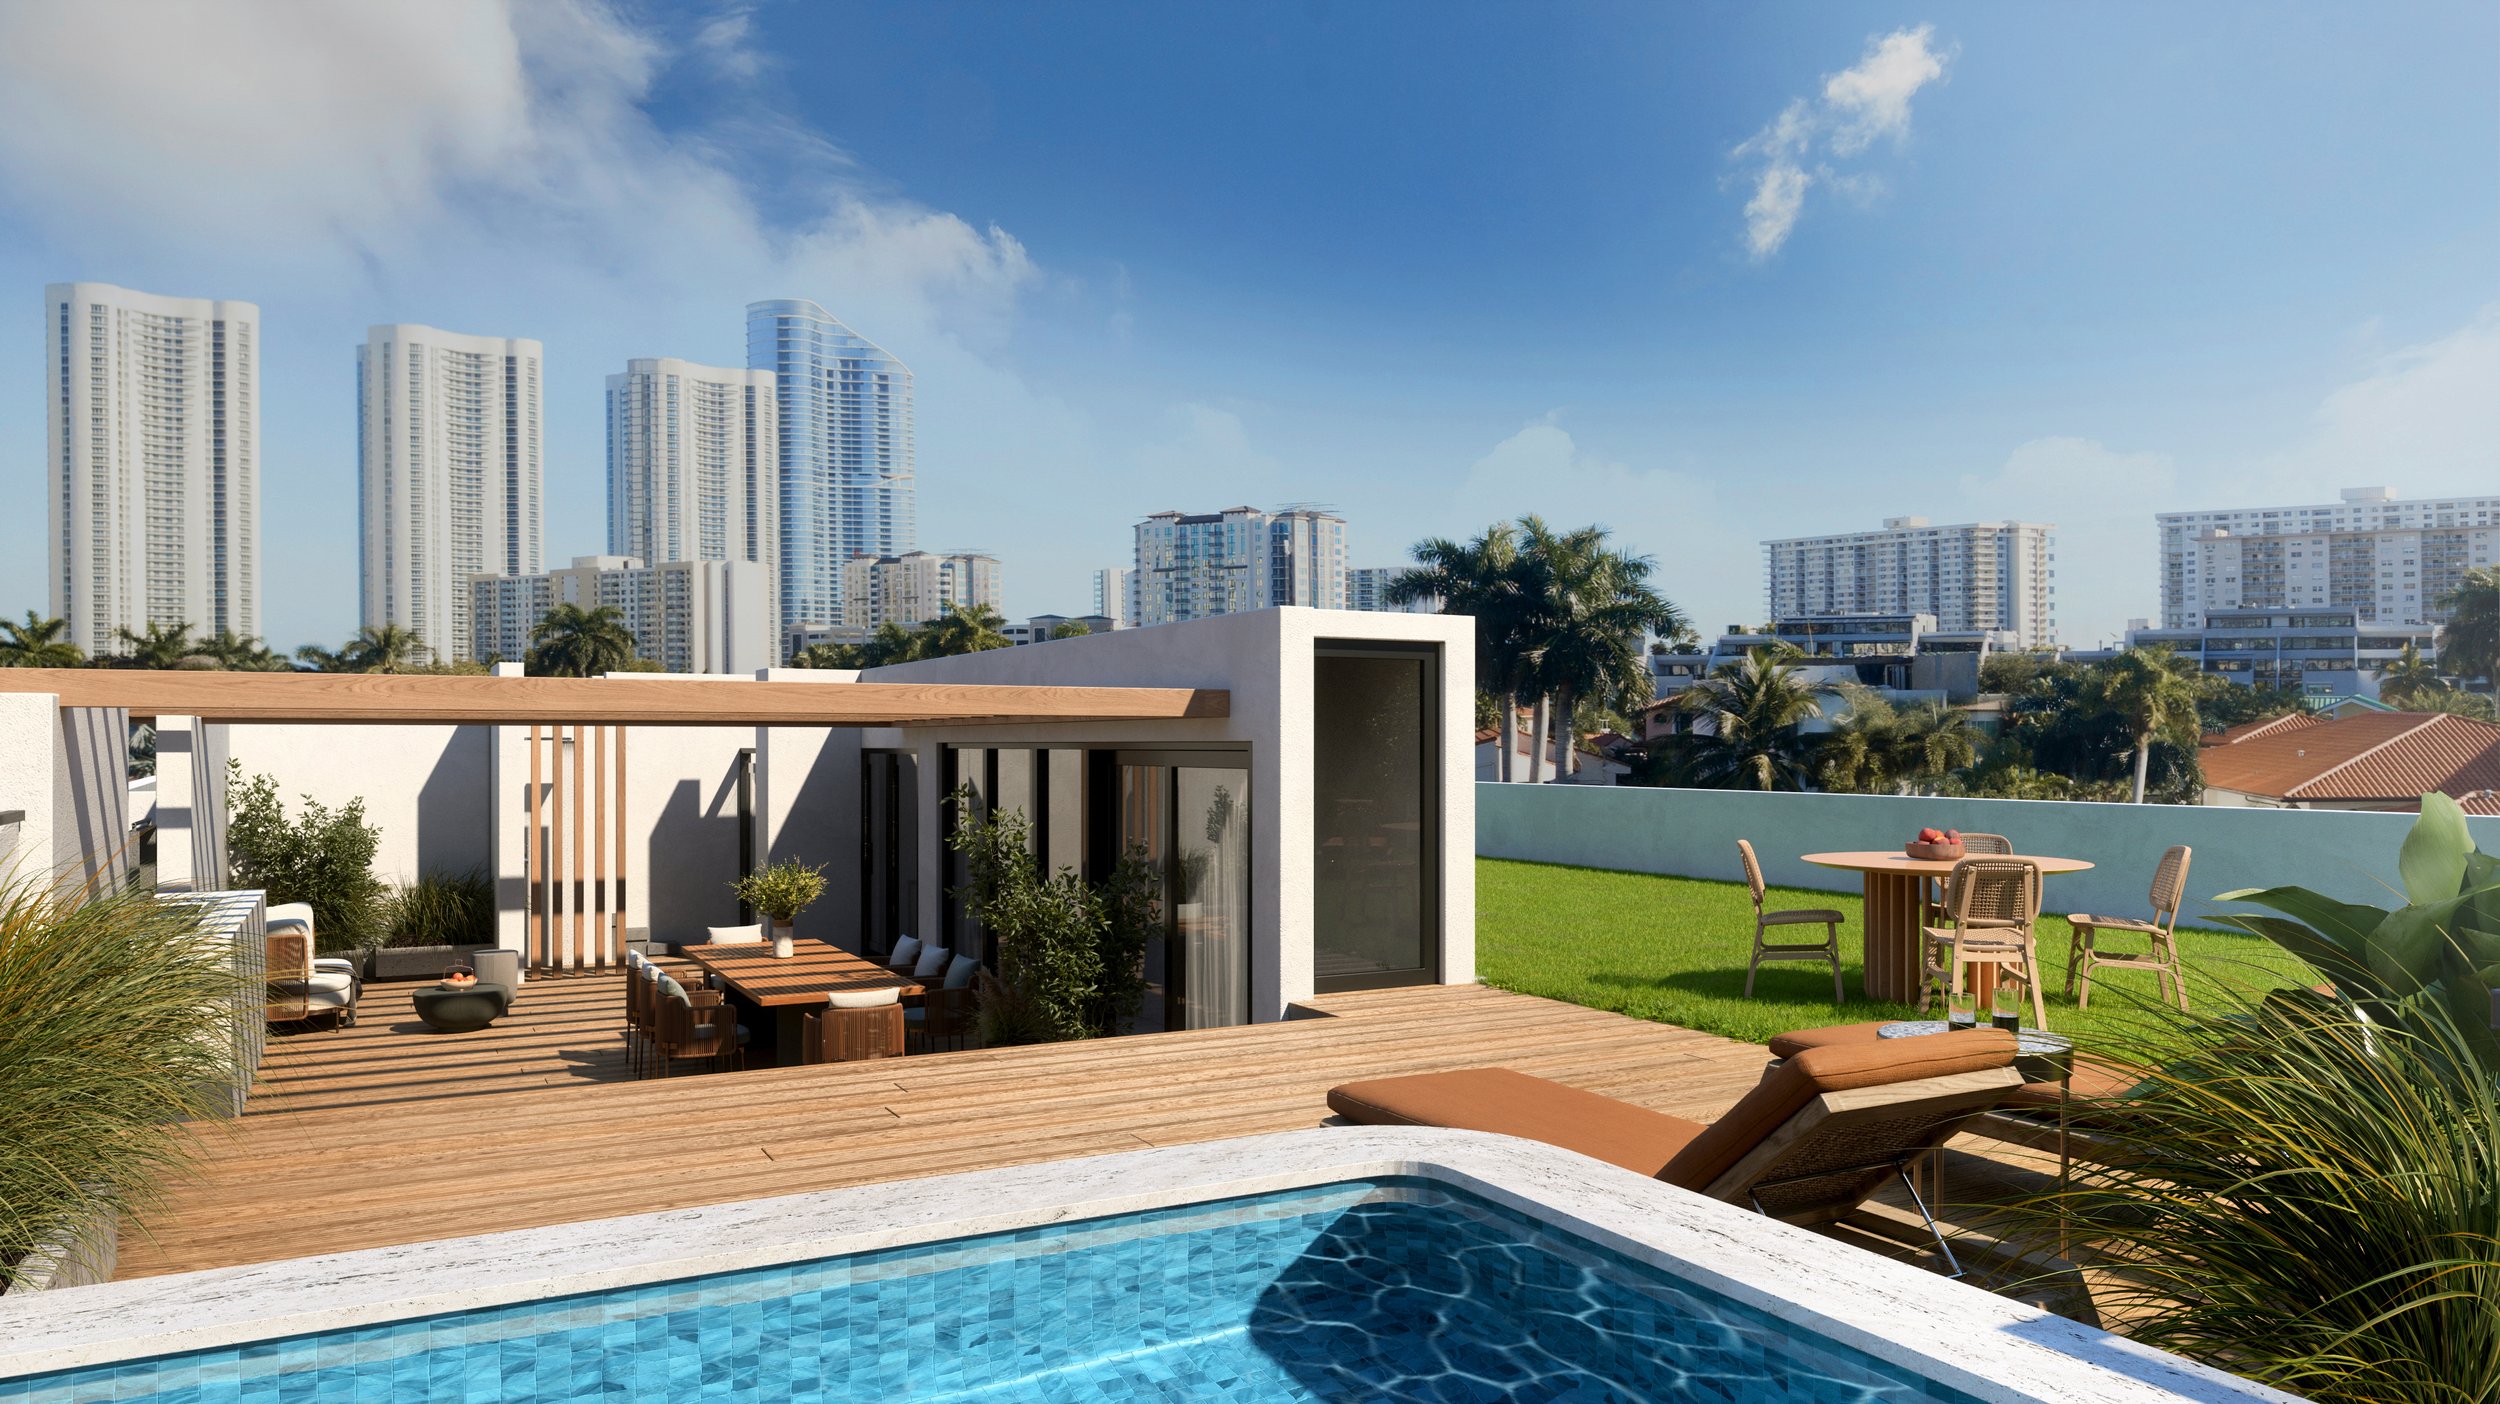 David Development Reveals Calil Architects-Designed Waterfront Spec Home In Sunny Isles Beach 6.jpg